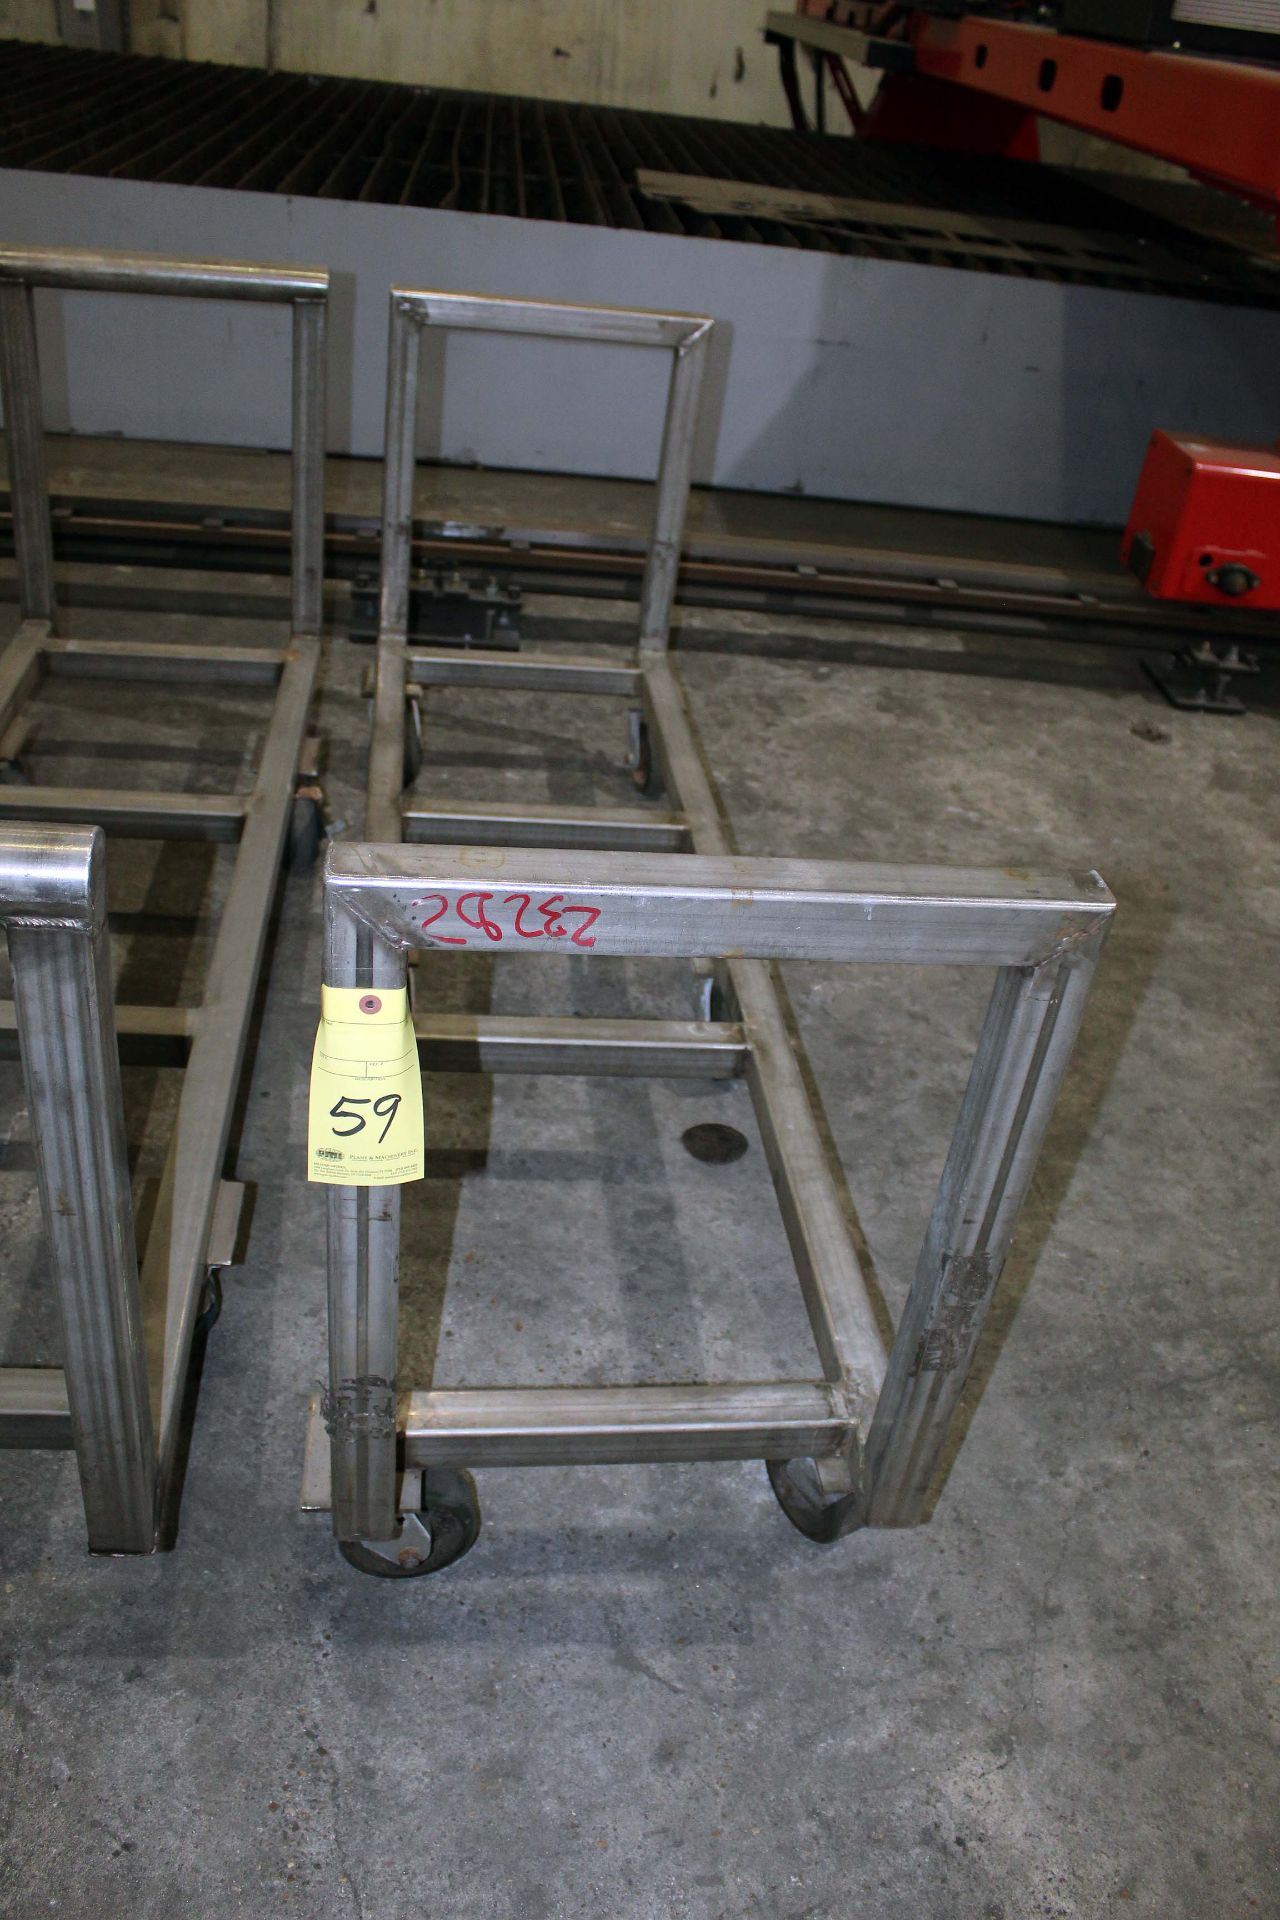 FABRICATED STAINLESS STEEL CART, 20" x 6'